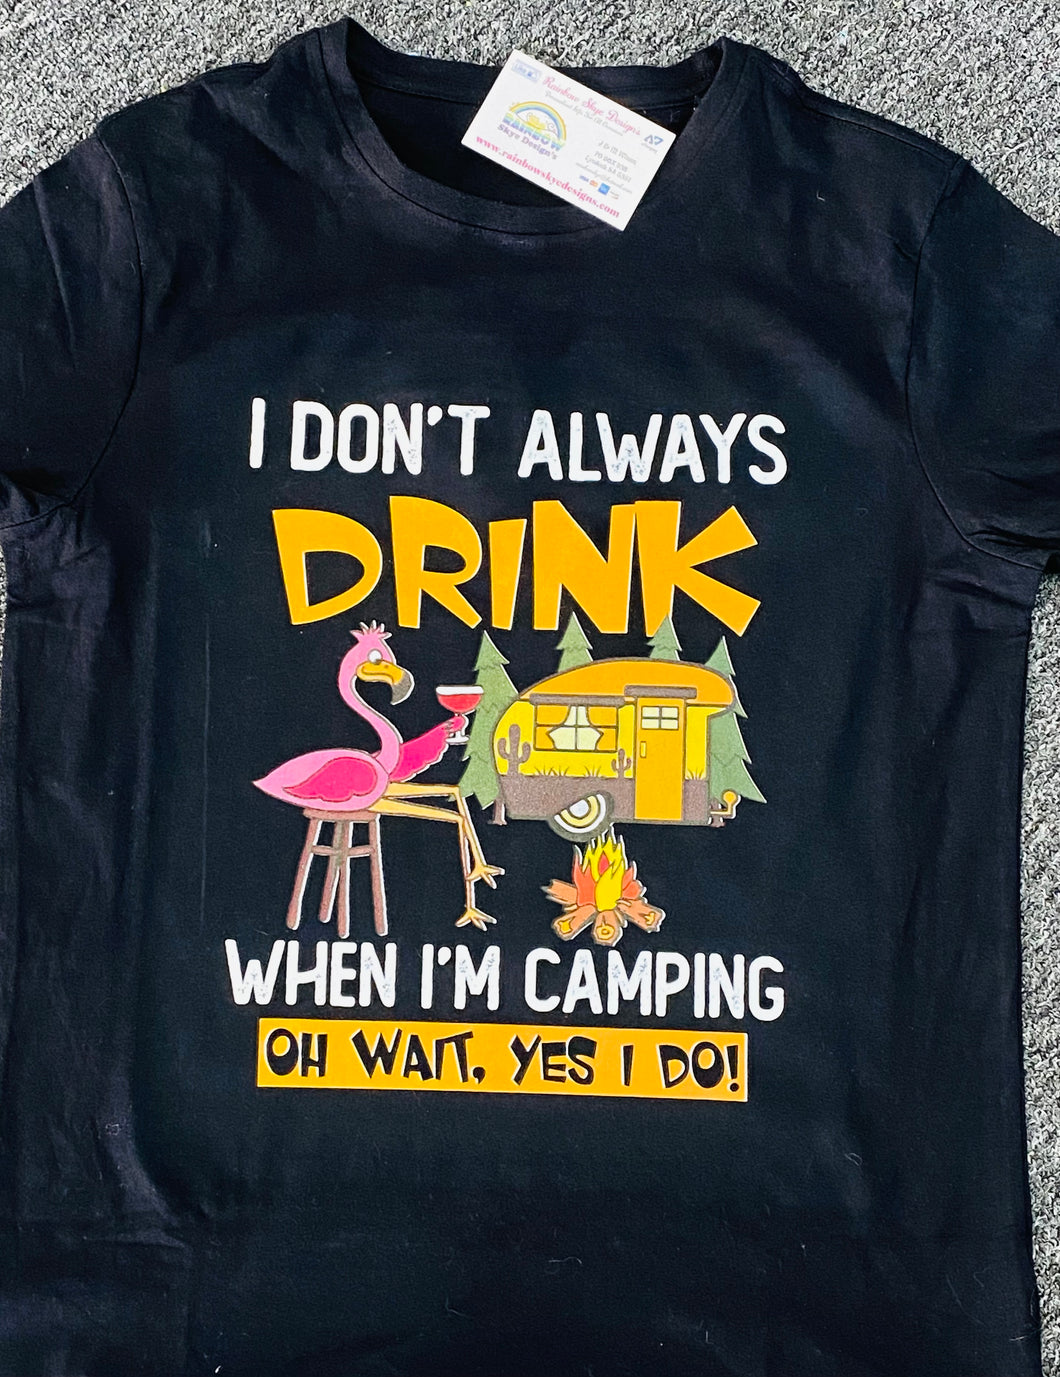 I don’t always drink when I’m camping  Tshirt